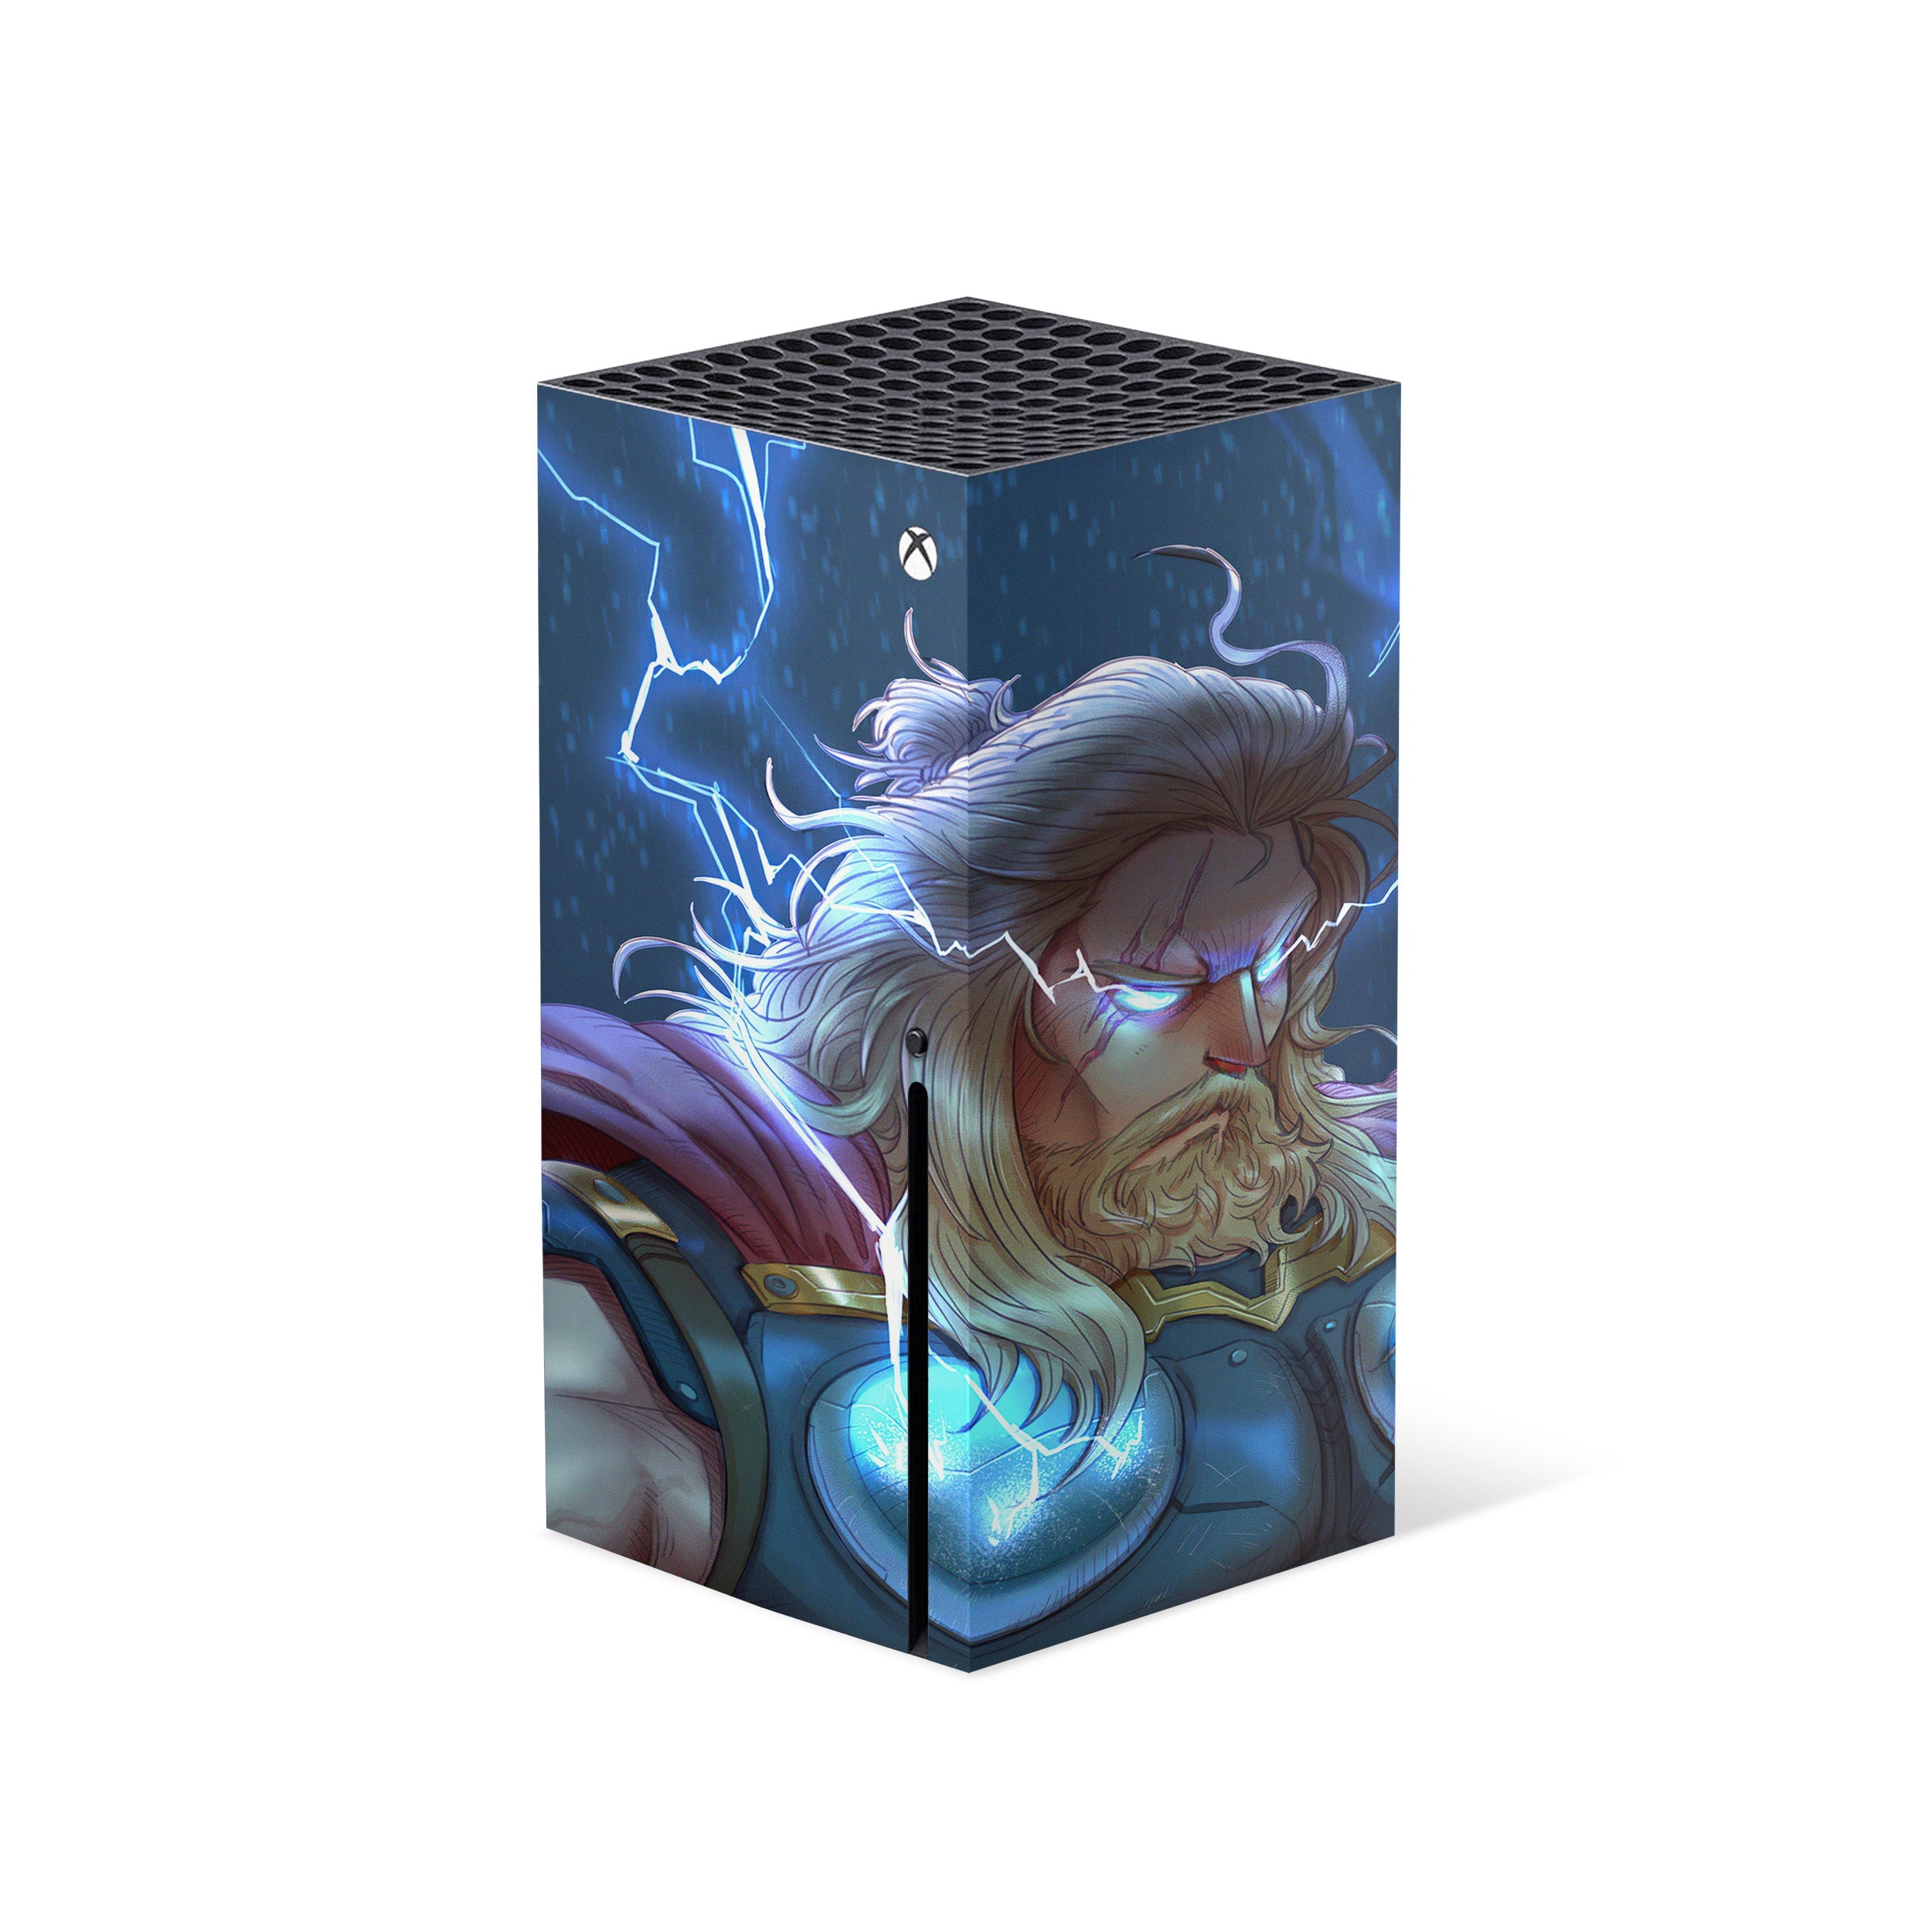 A video game skin featuring a Marvel Comics Thor design for the Xbox Series X.